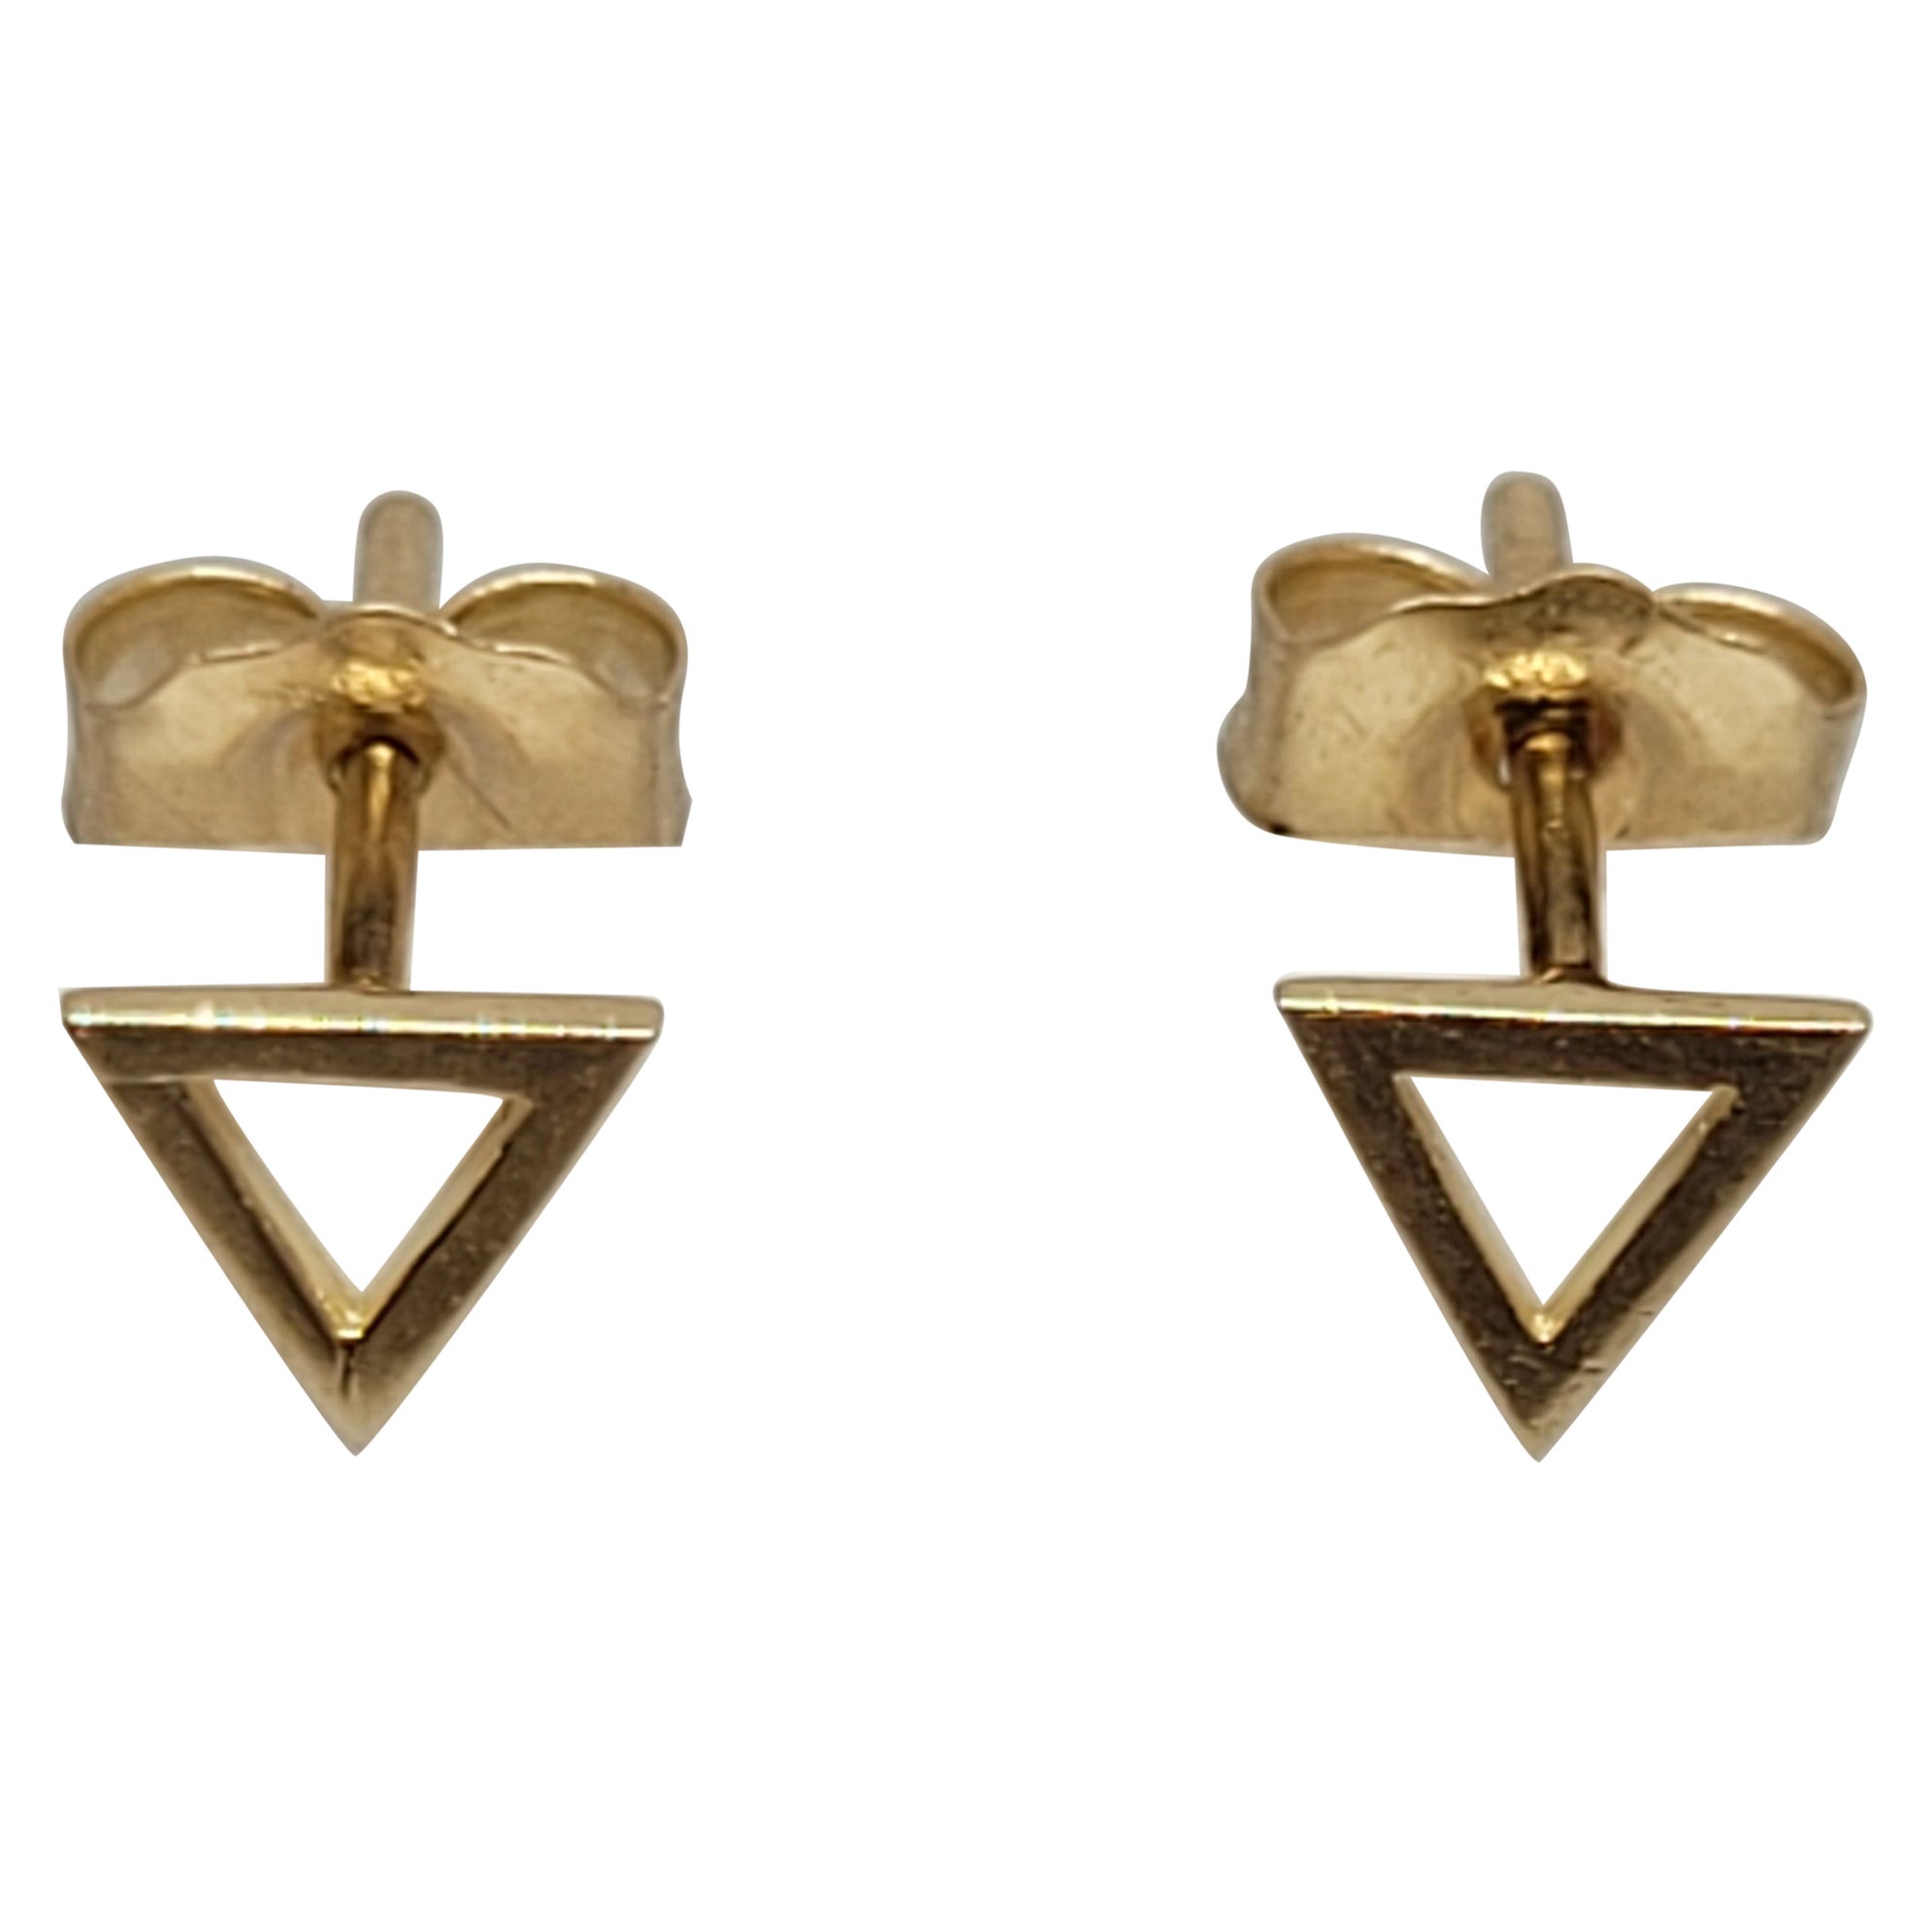 14kt Yellow Gold Triangle Earrings, Friction Posts, Petite, .4 Grams, Stamp 14kt